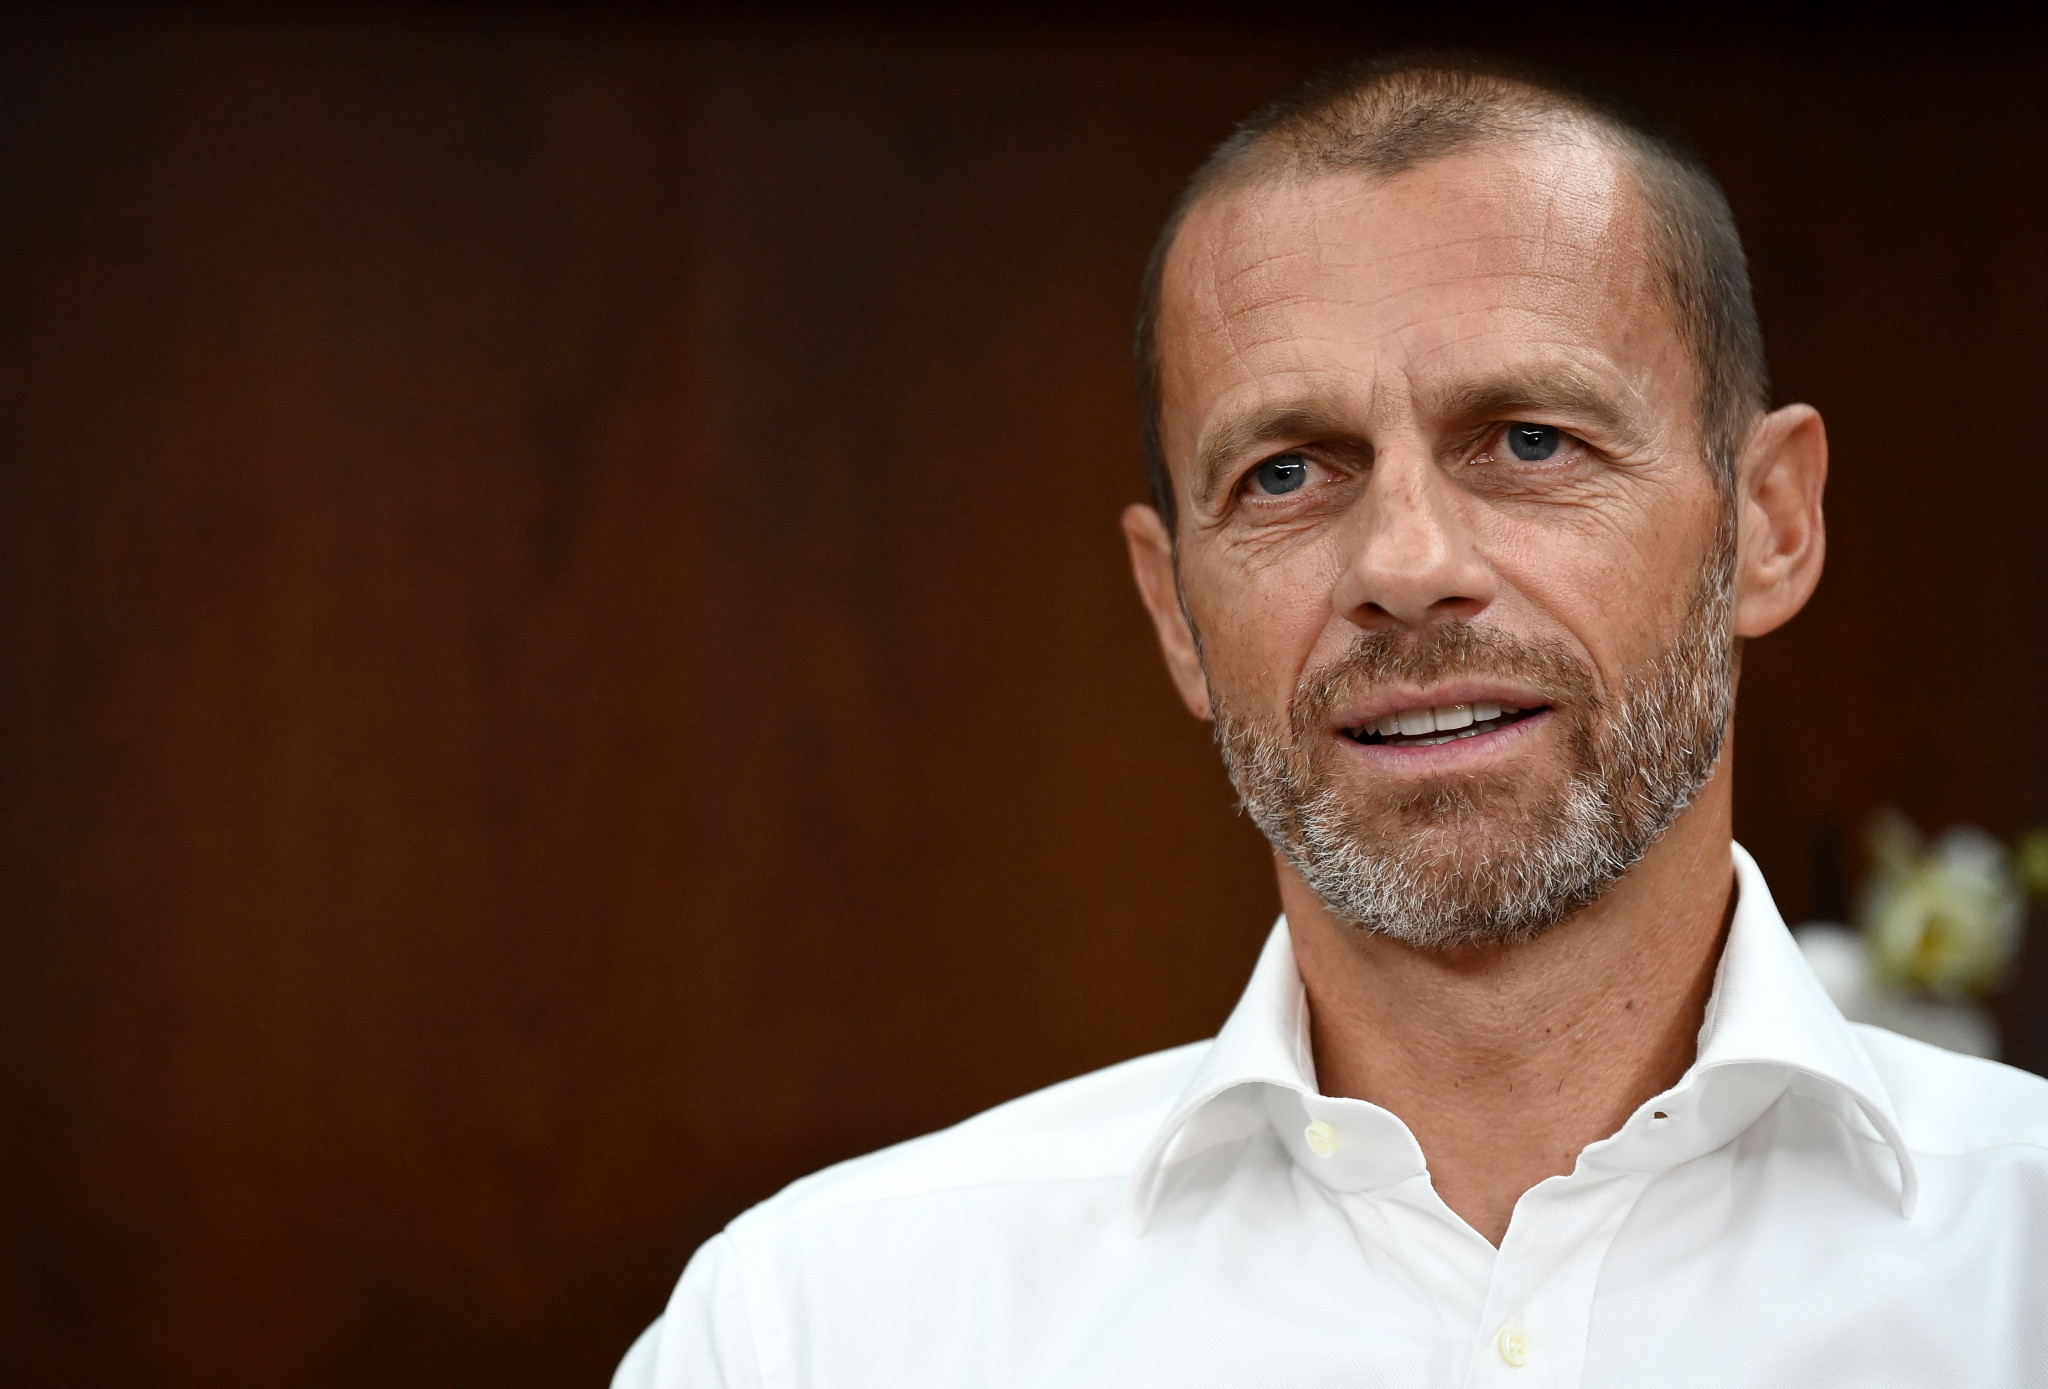 UEFA President says organisation "well prepared" for different Euro 2020 scenarios